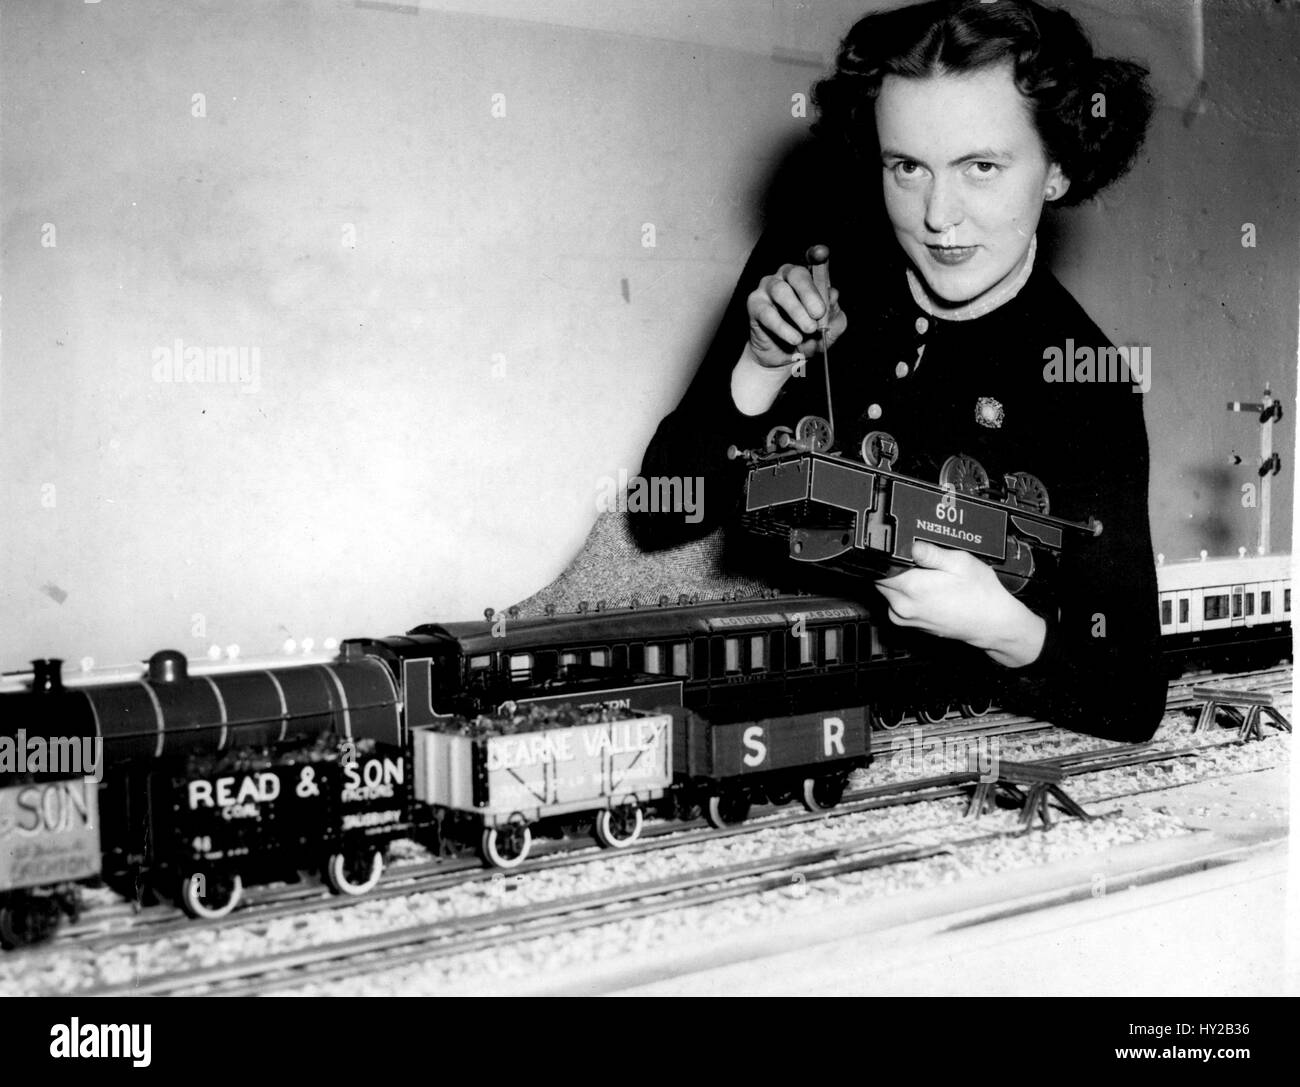 Nov. 11, 1955 - 11-4-55 Preparations for Model Railway Exhibition Ã¢â‚¬â€œ The Model Railway Exhibition opens at the Central Hall, Westminster, tomorrow. Keystone Photo Shows: Mrs. Isabel Robert, of Holborn, who makes trains as a hobby, and who will be the only woman exhibitor at the exhibition seen helping to get a model railway together at the Central Hall today. (Credit Image: © Keystone Press Agency/Keystone USA via ZUMAPRESS.com) Stock Photo